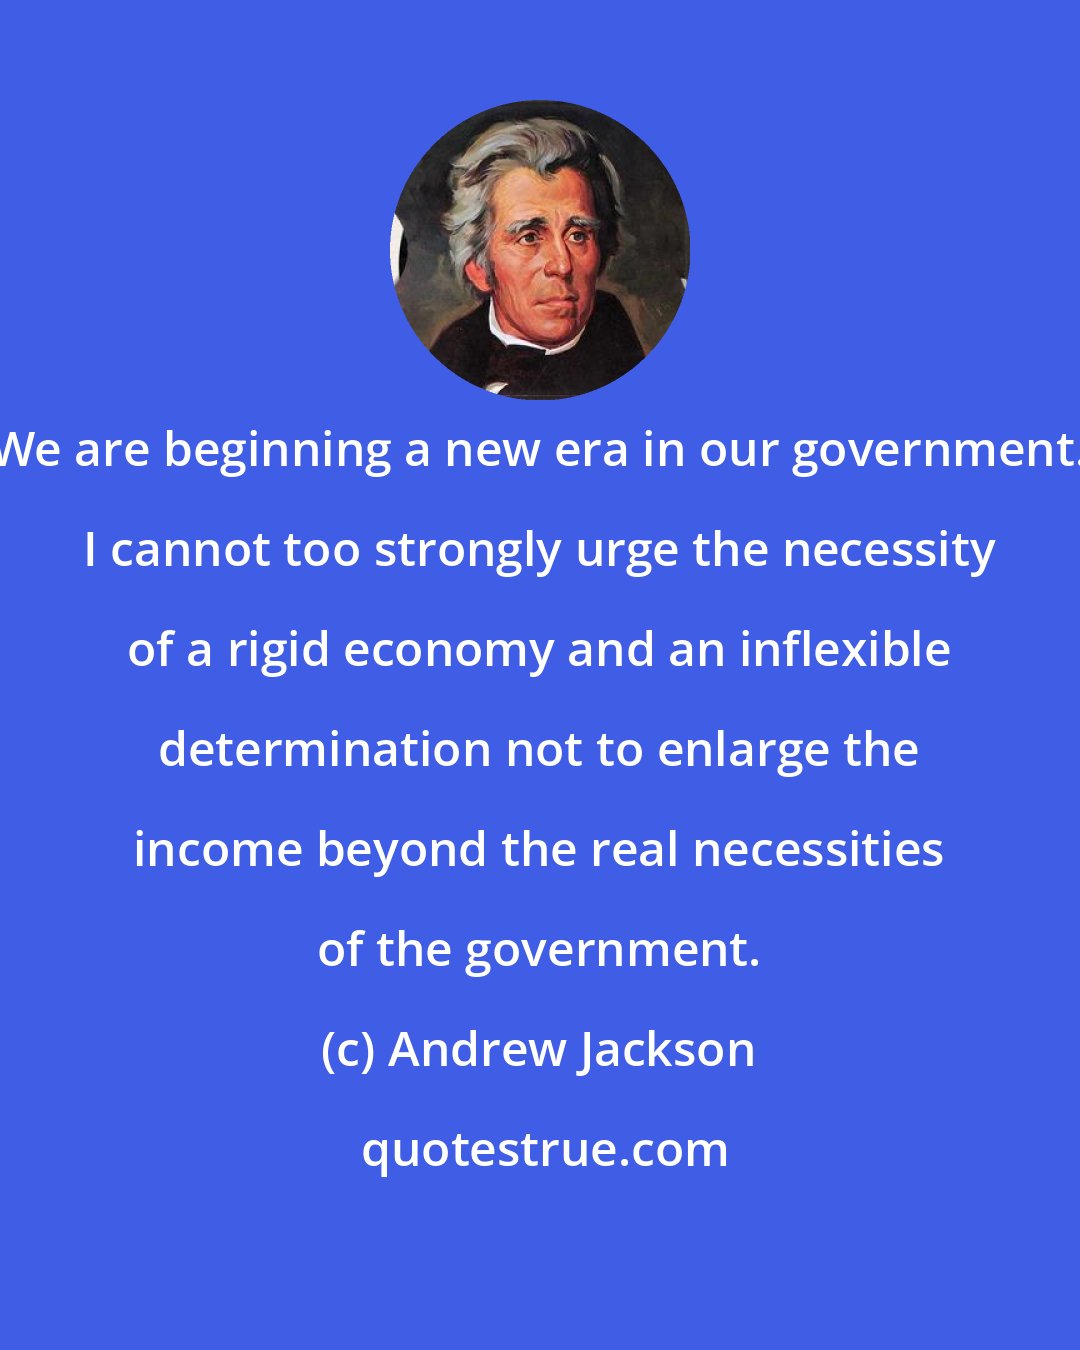 Andrew Jackson: We are beginning a new era in our government. I cannot too strongly urge the necessity of a rigid economy and an inflexible determination not to enlarge the income beyond the real necessities of the government.